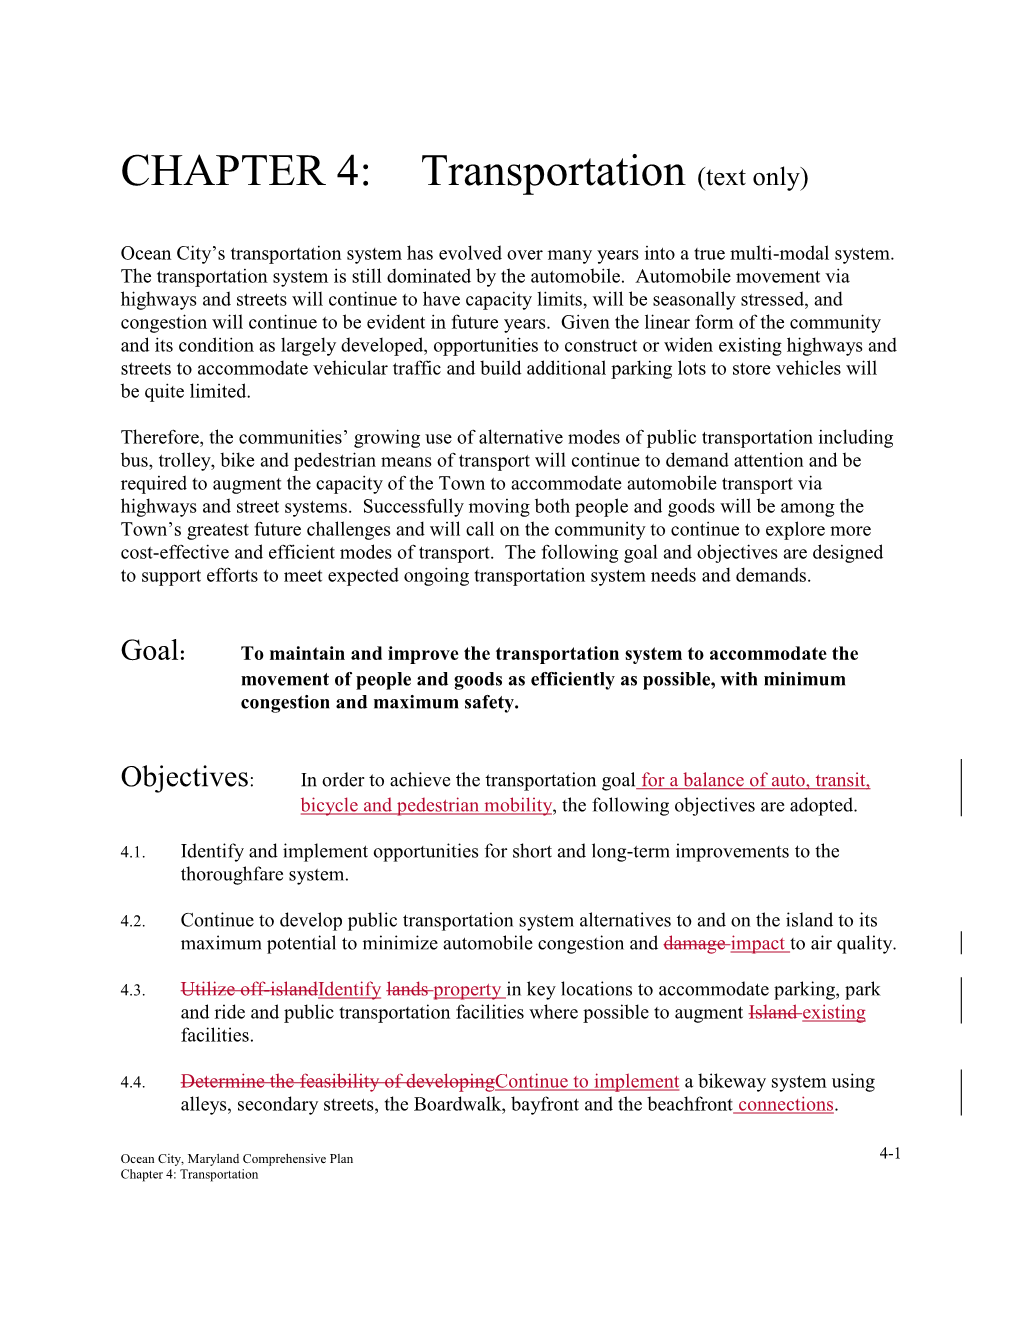 CHAPTER 4: Transportation (Text Only)